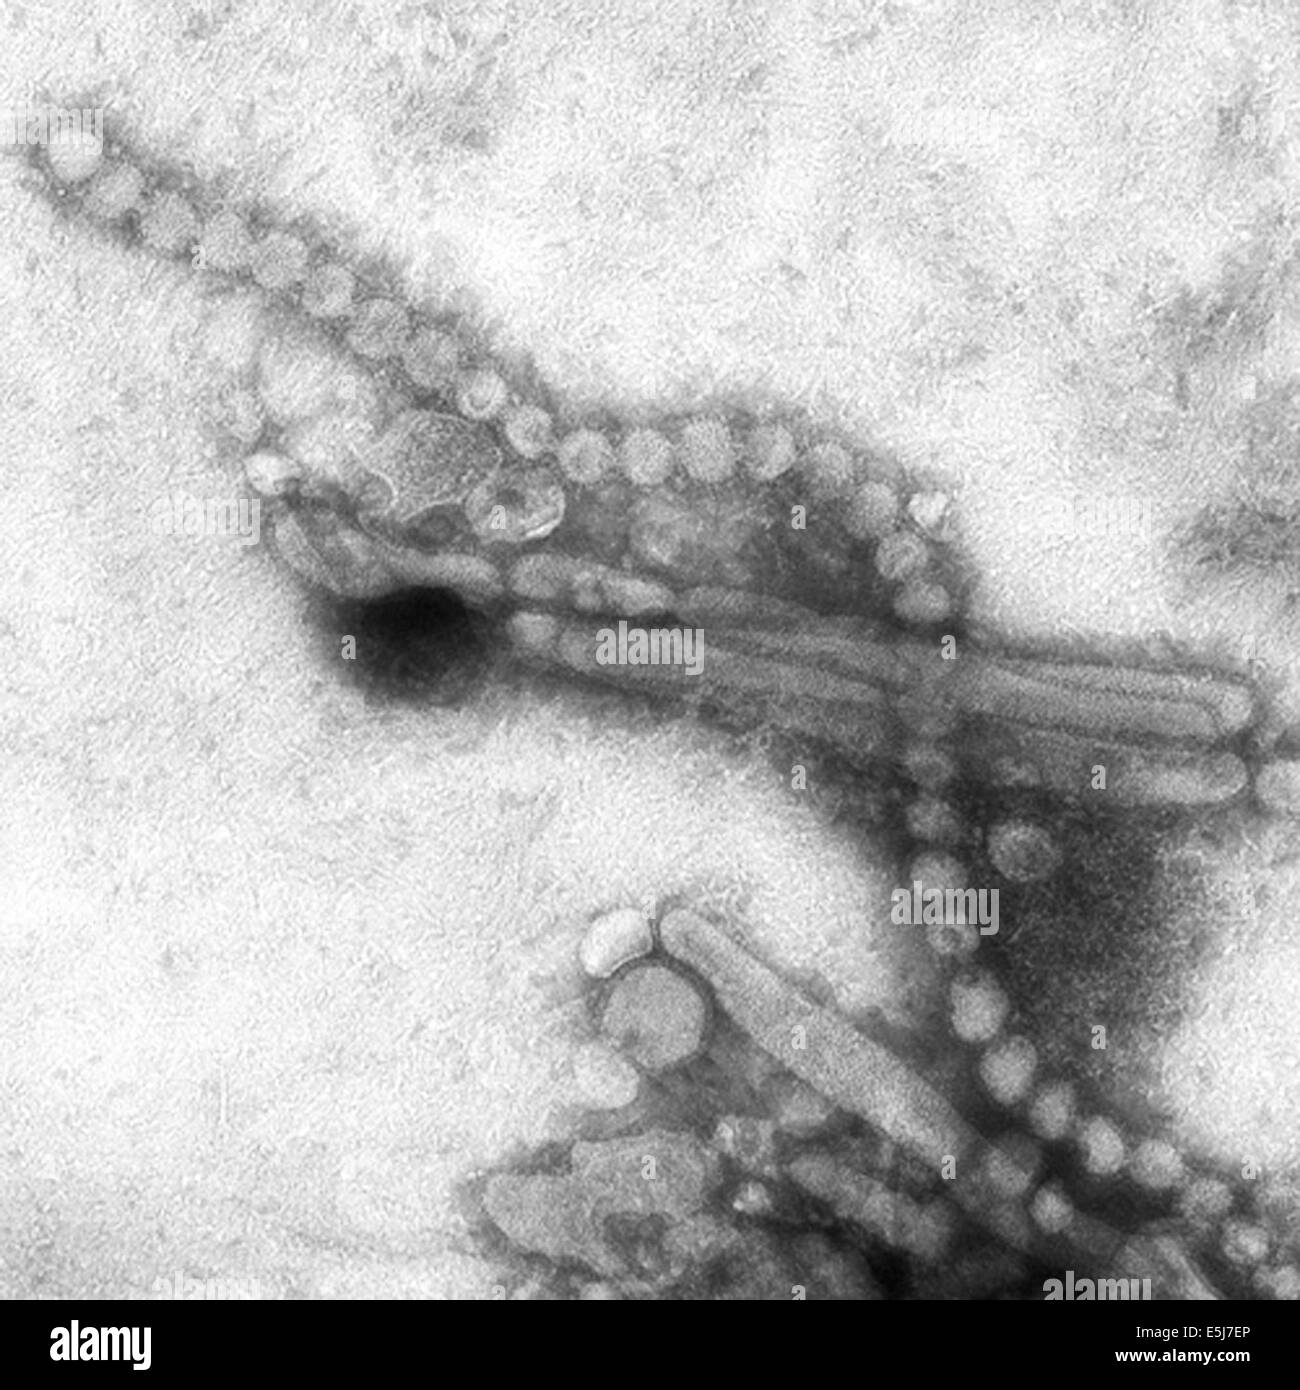 Influenza  H7N9  virus as viewed through an electron microscope. Both filaments and spheres are observed in this photo from the archives of Press Portrait Service Stock Photo